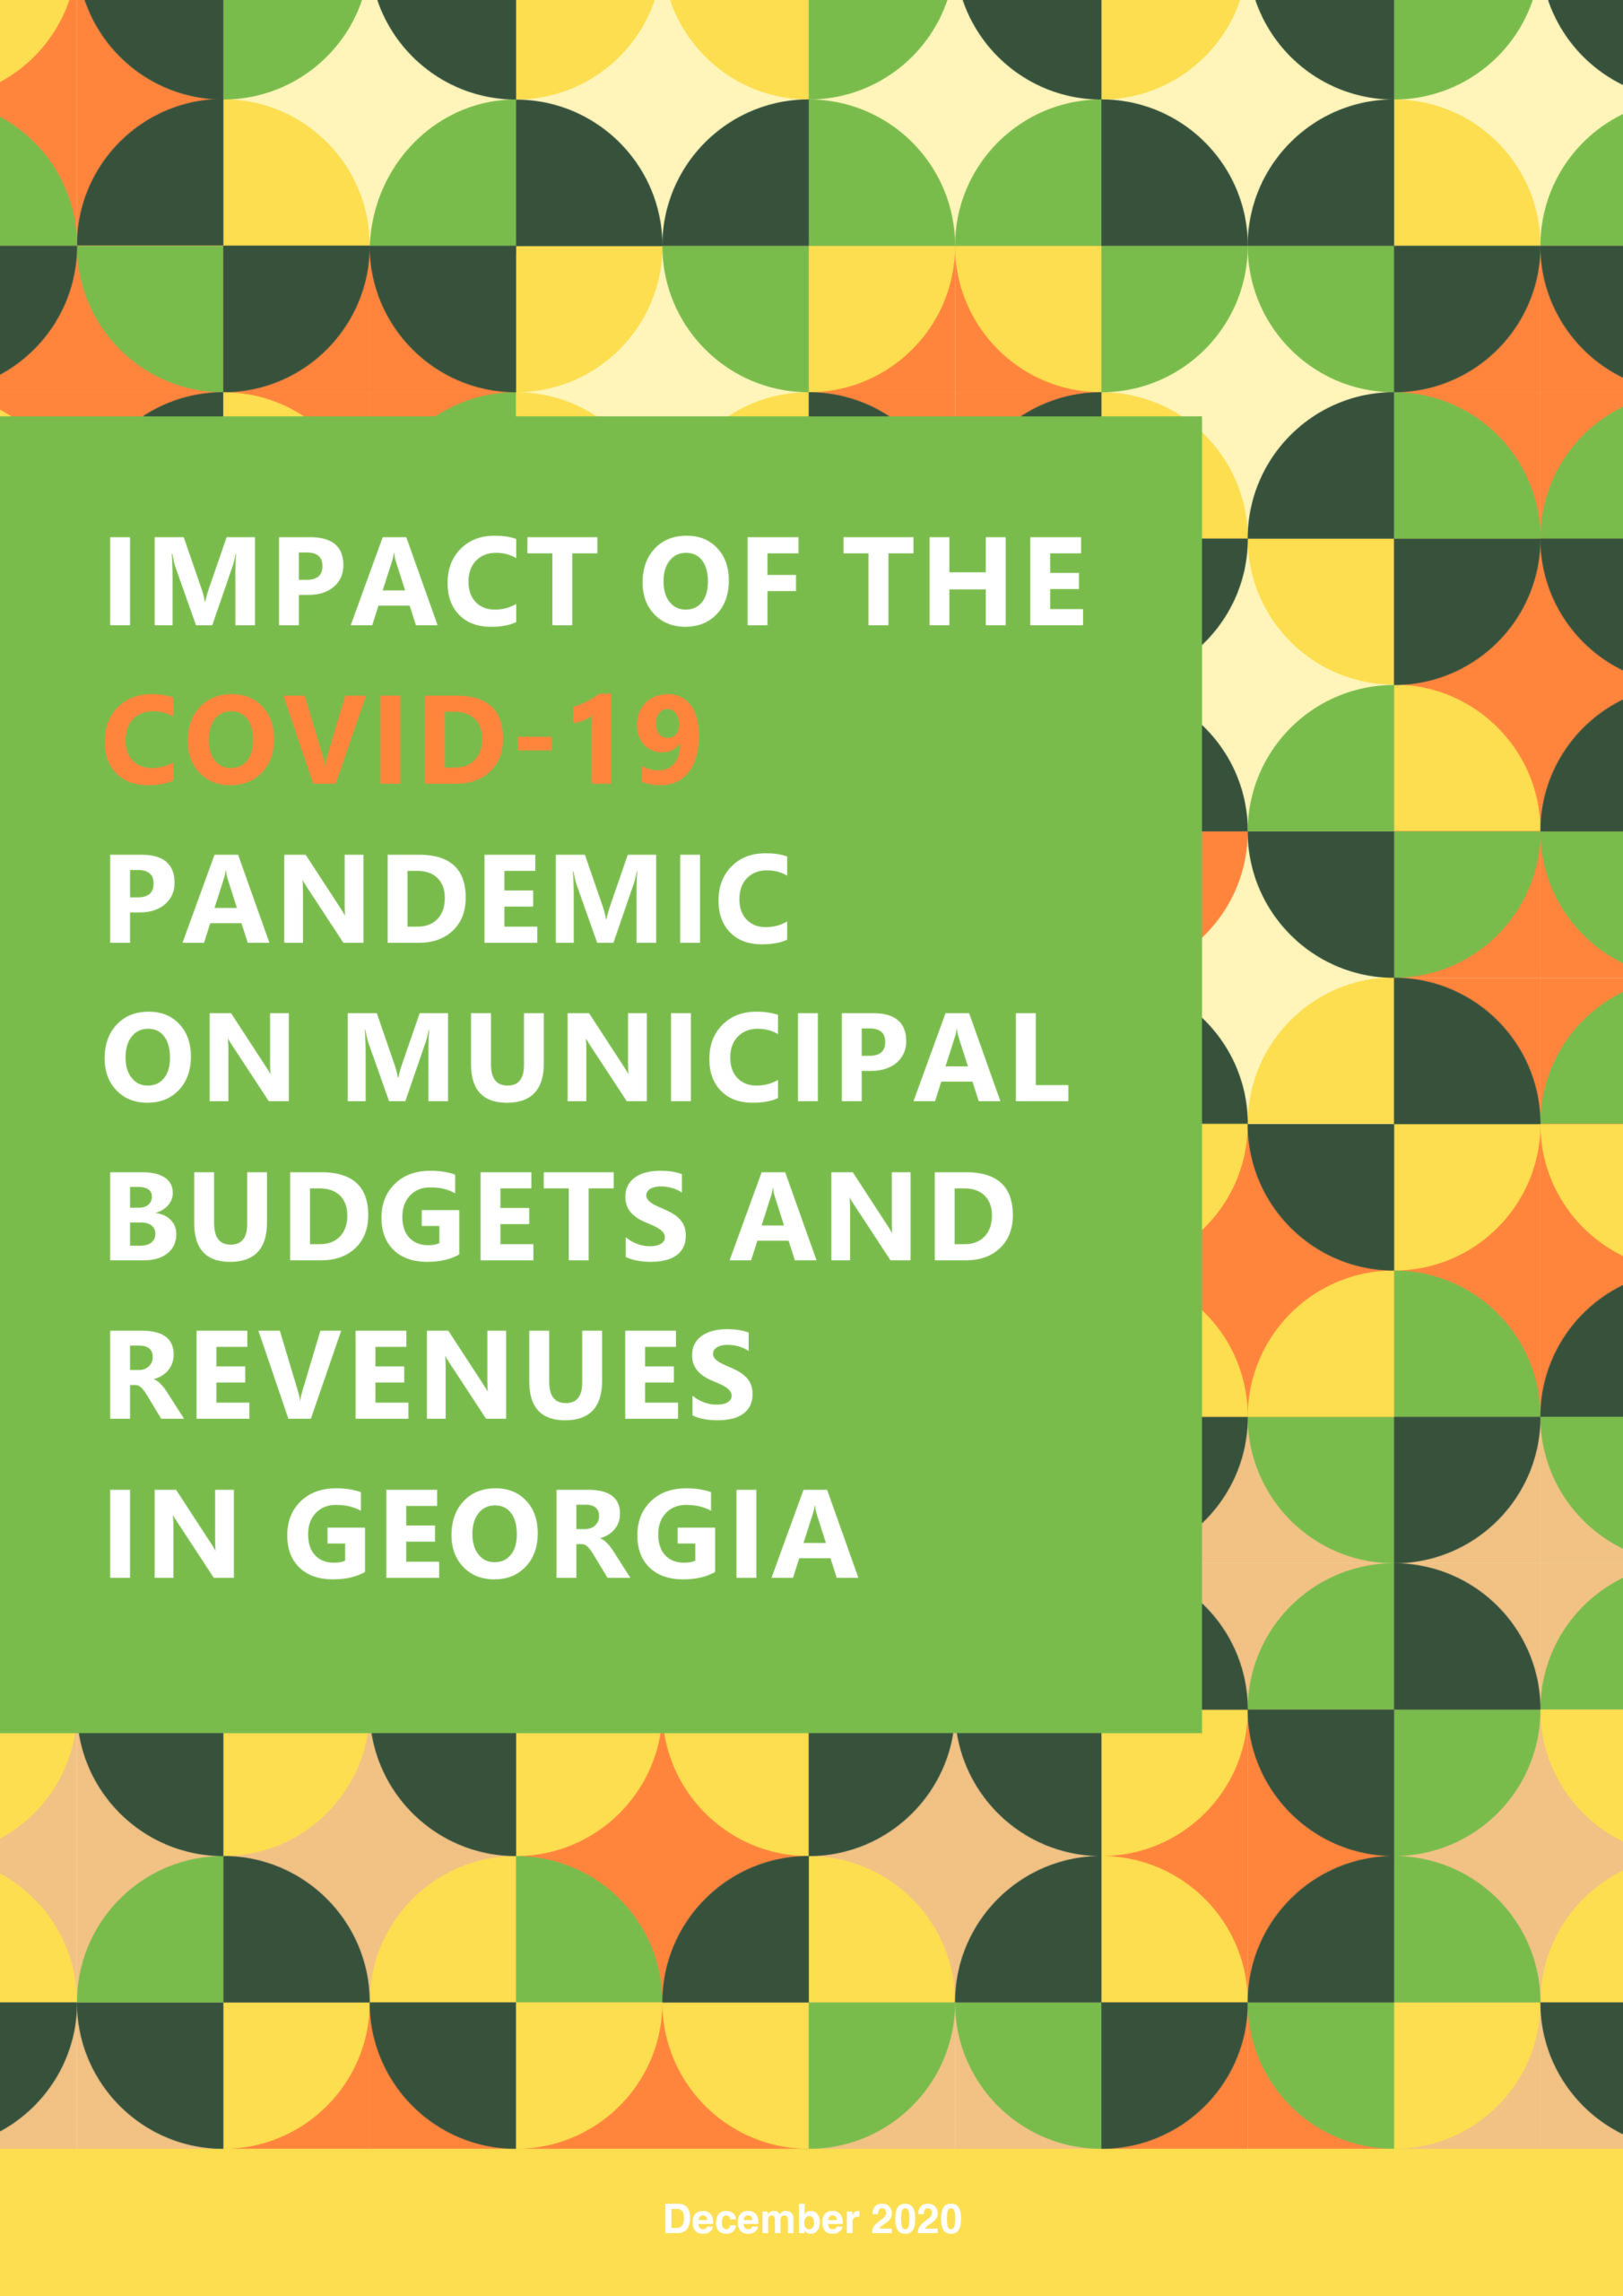 Impact of the COVID-19 pandemic on municipal budgets and revenues in Georgia